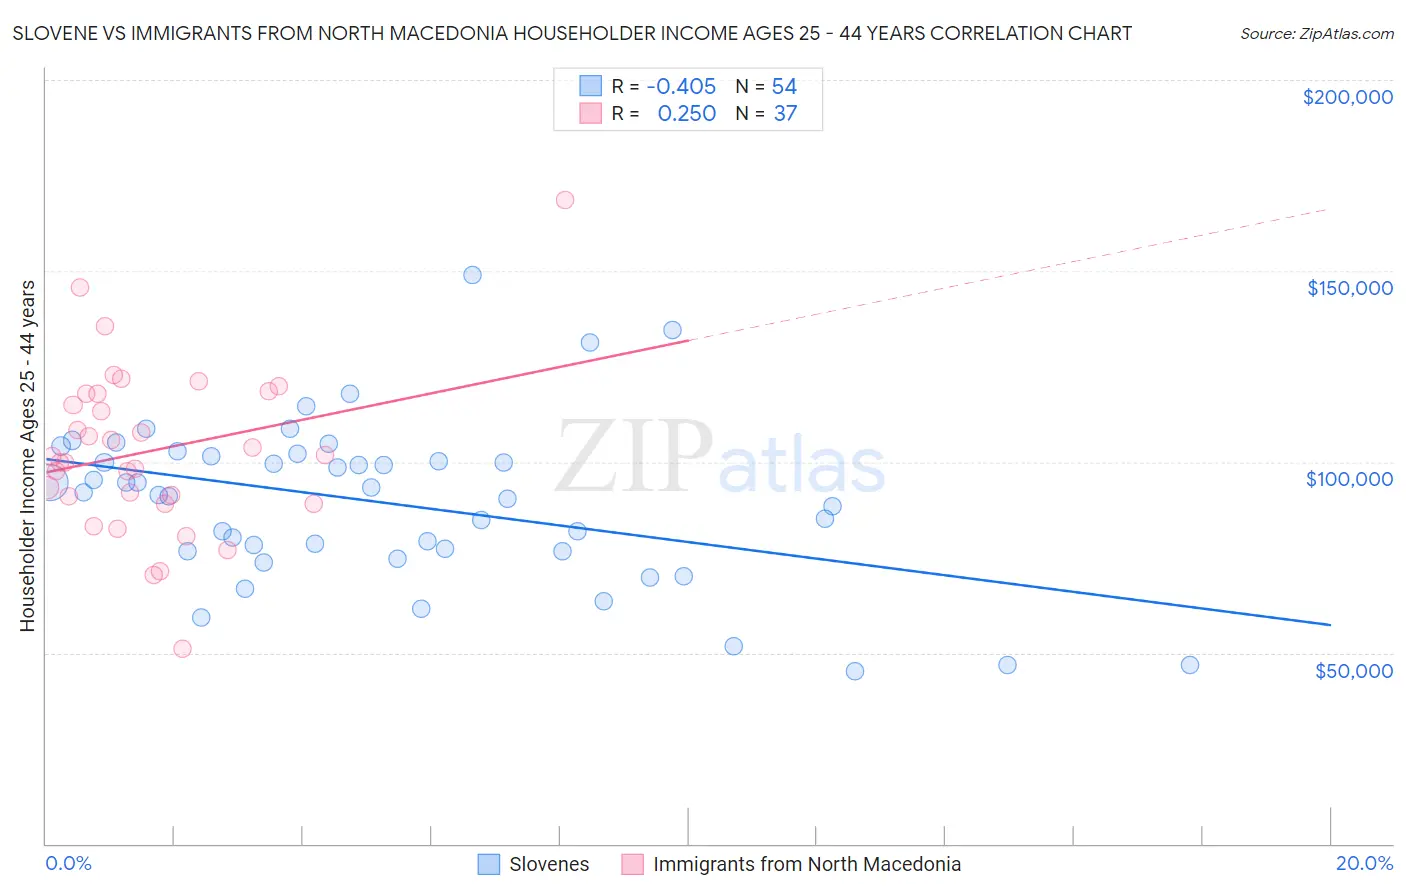 Slovene vs Immigrants from North Macedonia Householder Income Ages 25 - 44 years